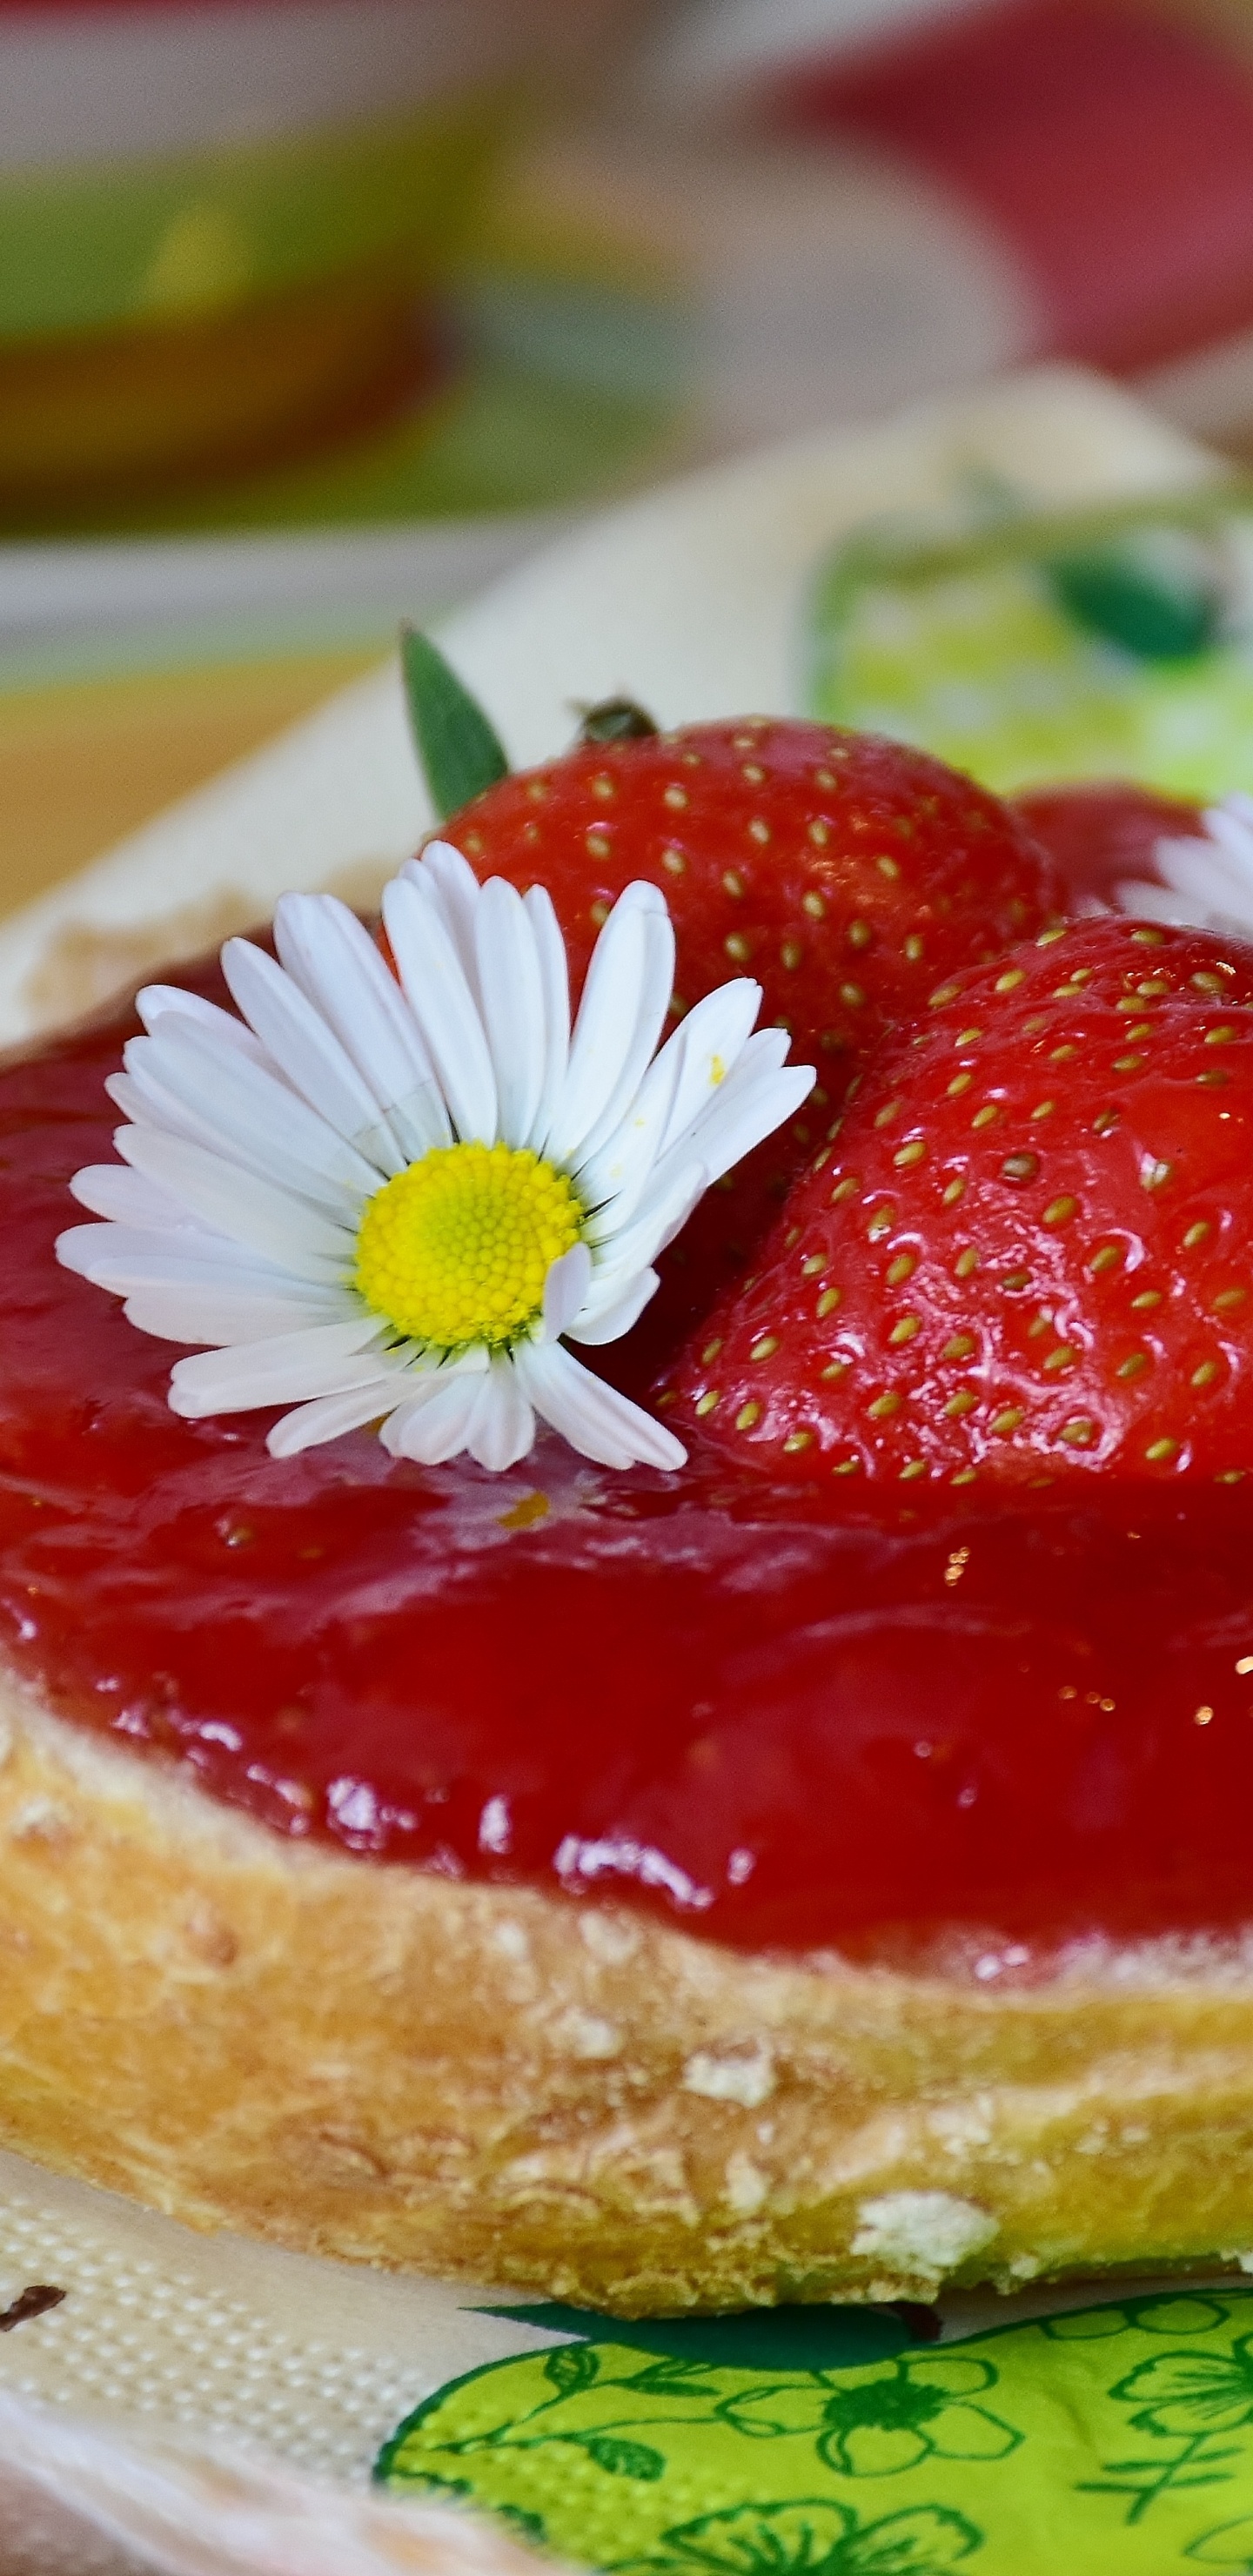 Strawberry on Bread With Cream on Top. Wallpaper in 1440x2960 Resolution